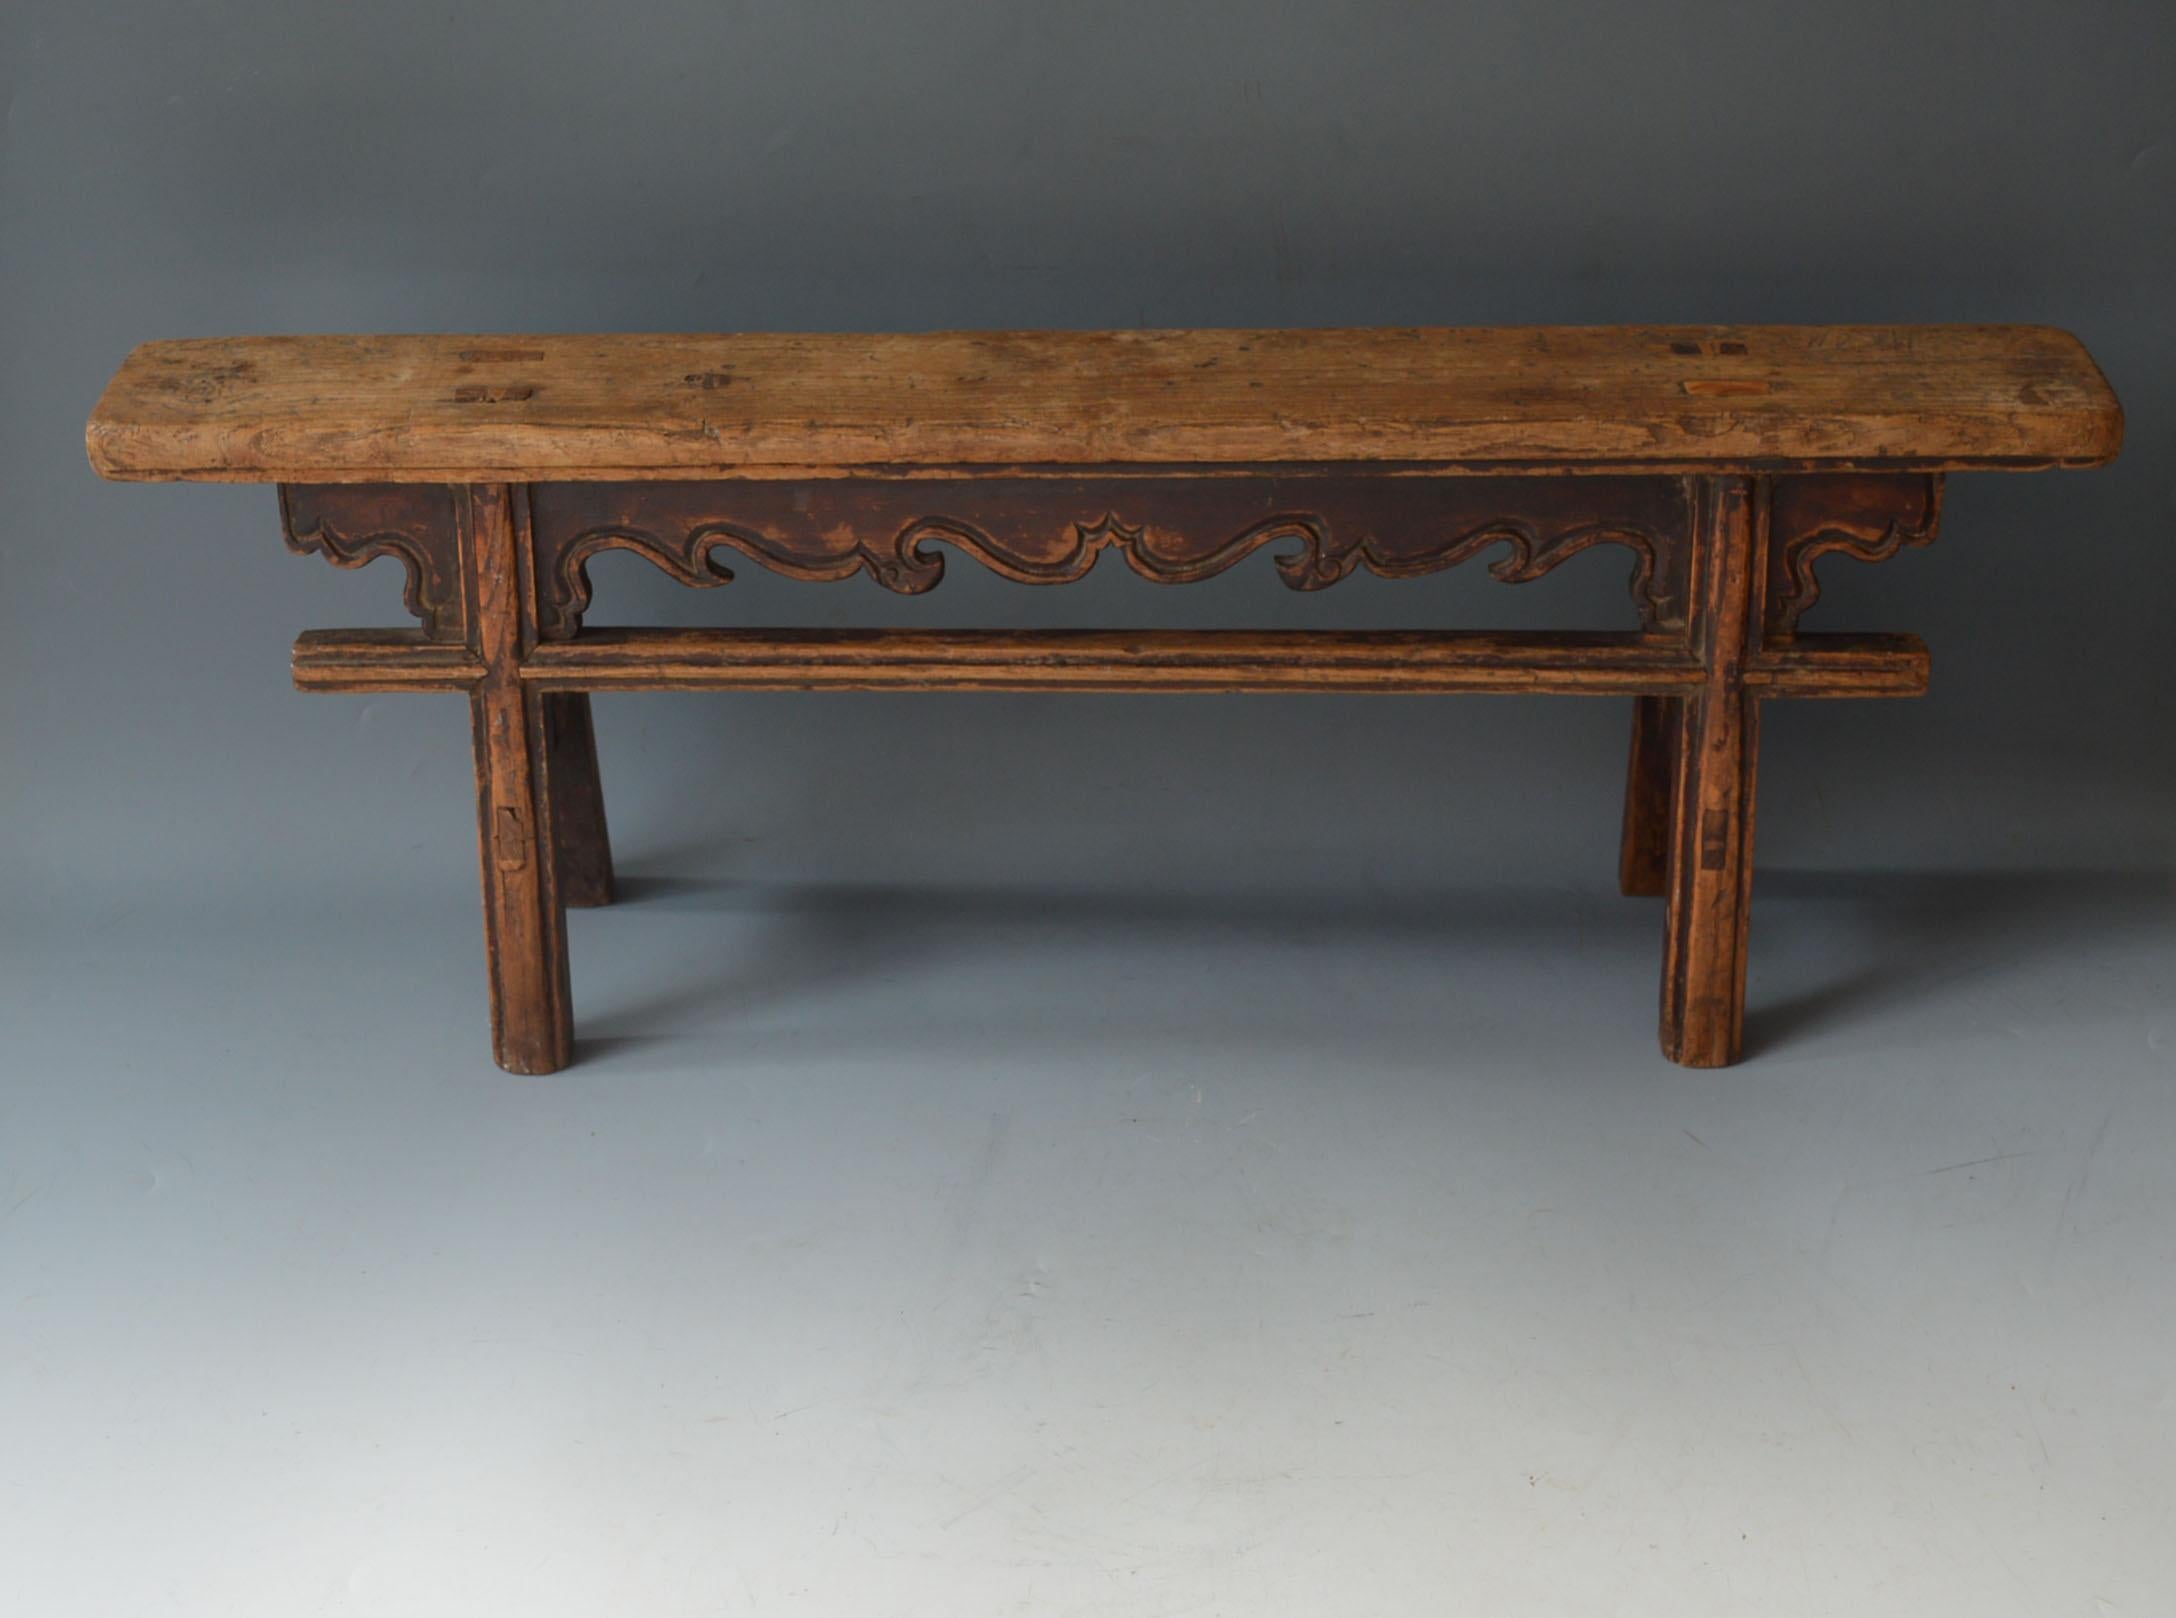 A fine small antique Chinese provincial Altar table circa 18th-19th century
with wave detail probably elmwood.
Condition: Good.